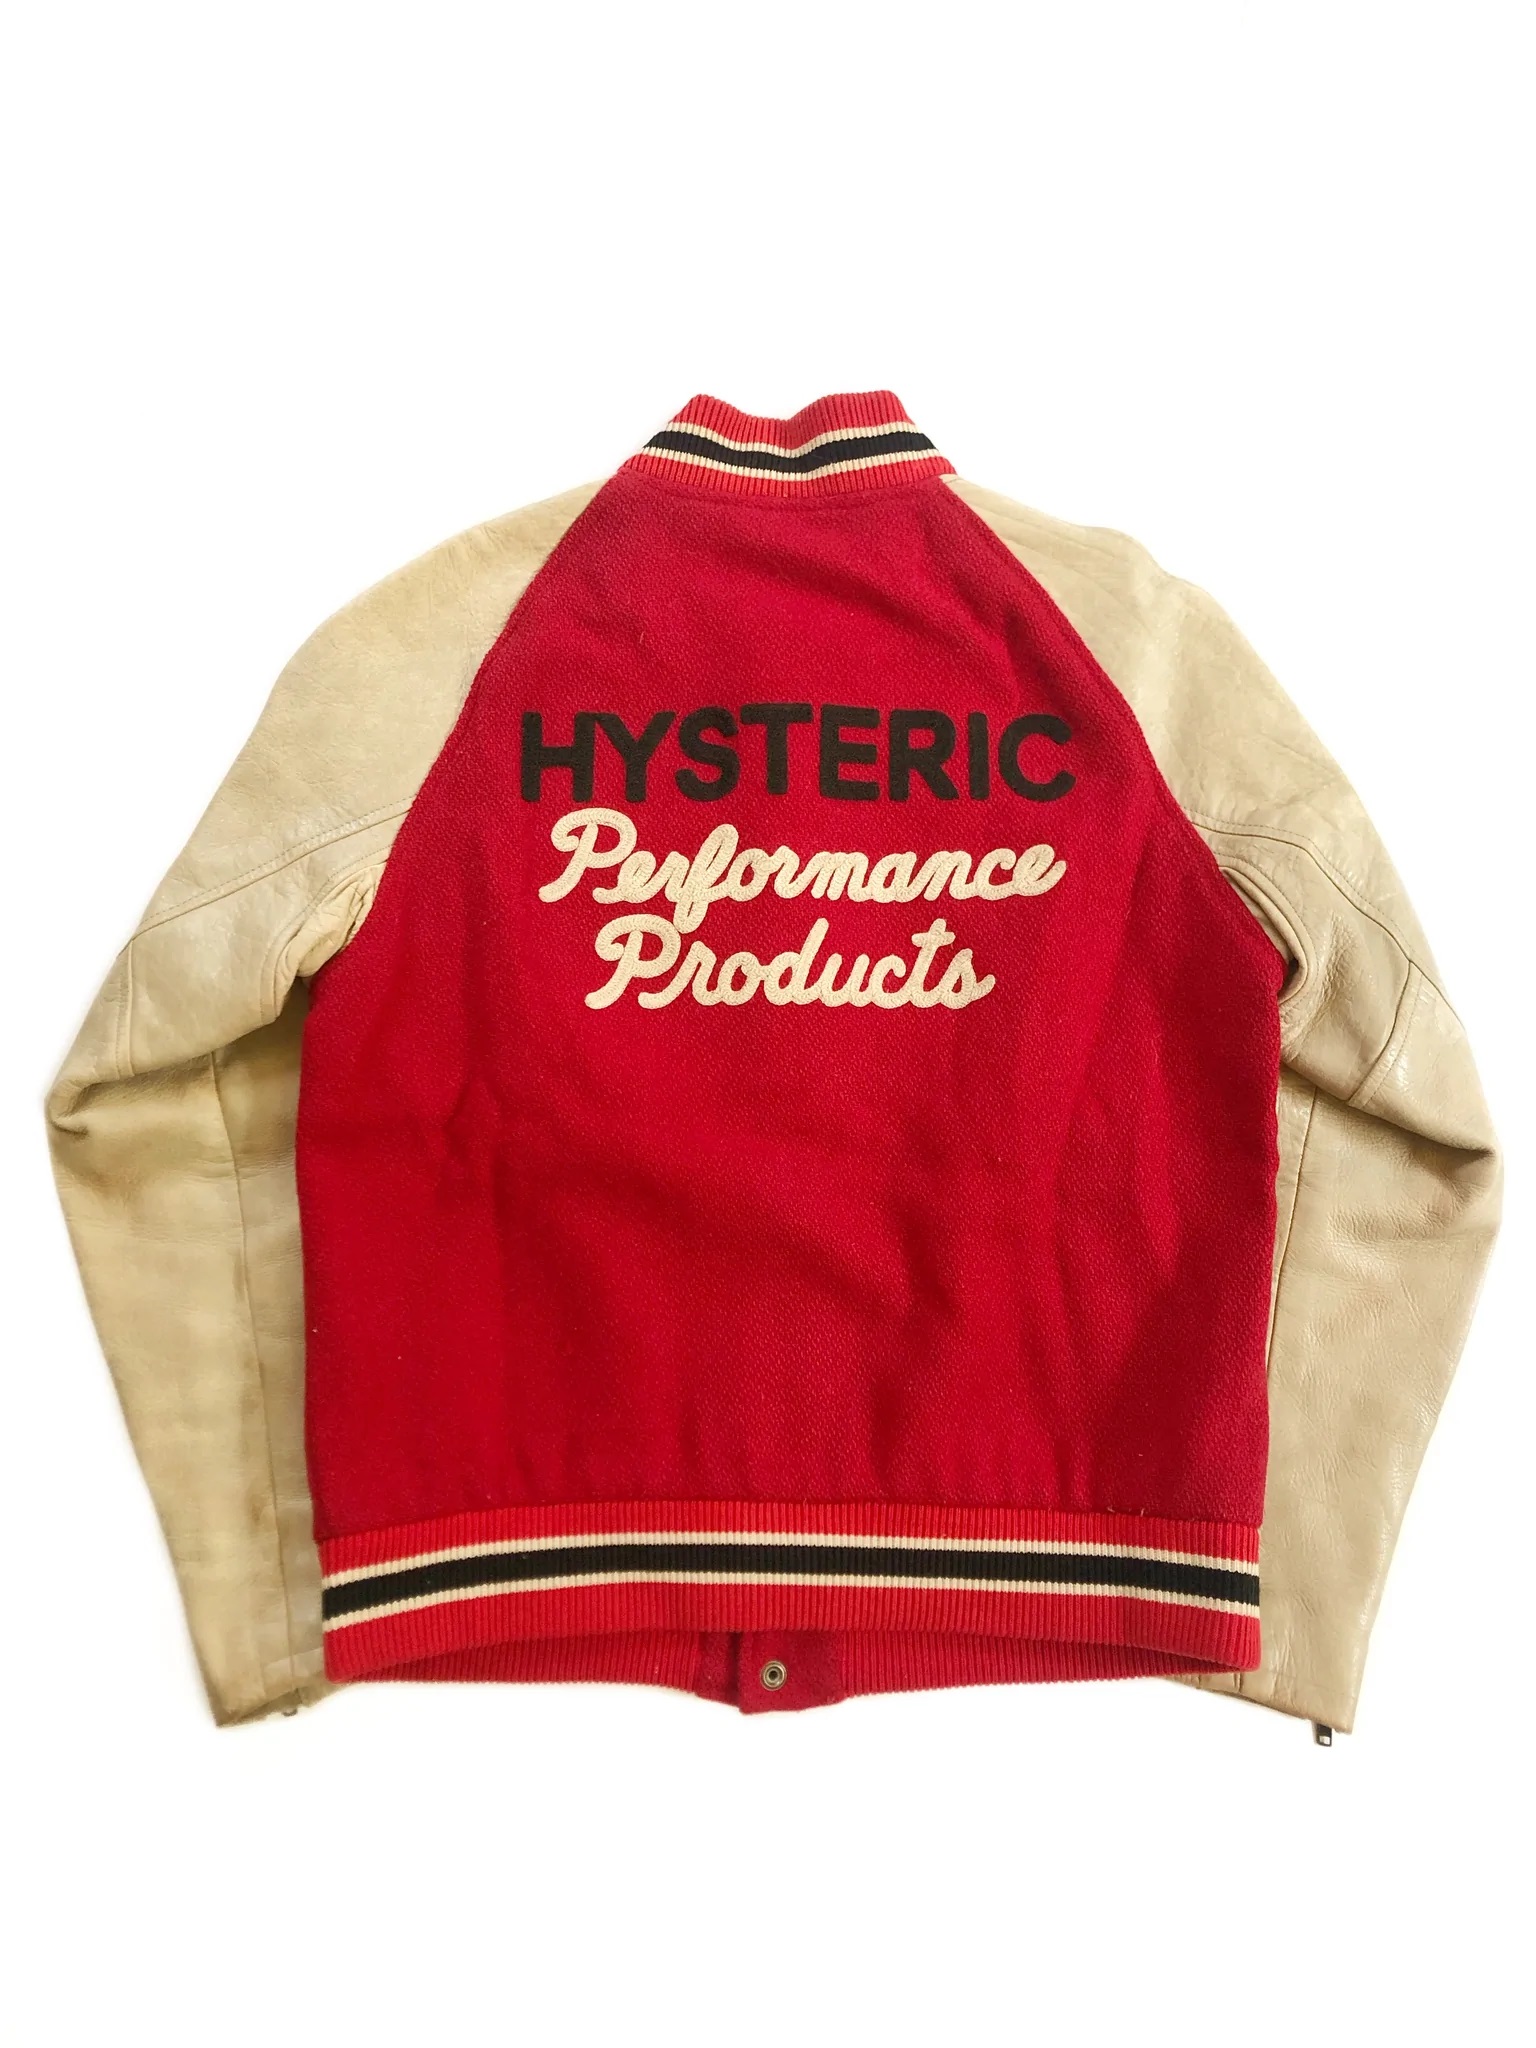 Hysteric Glamour Hi Performance Product Red Jacket - Maker of Jacket